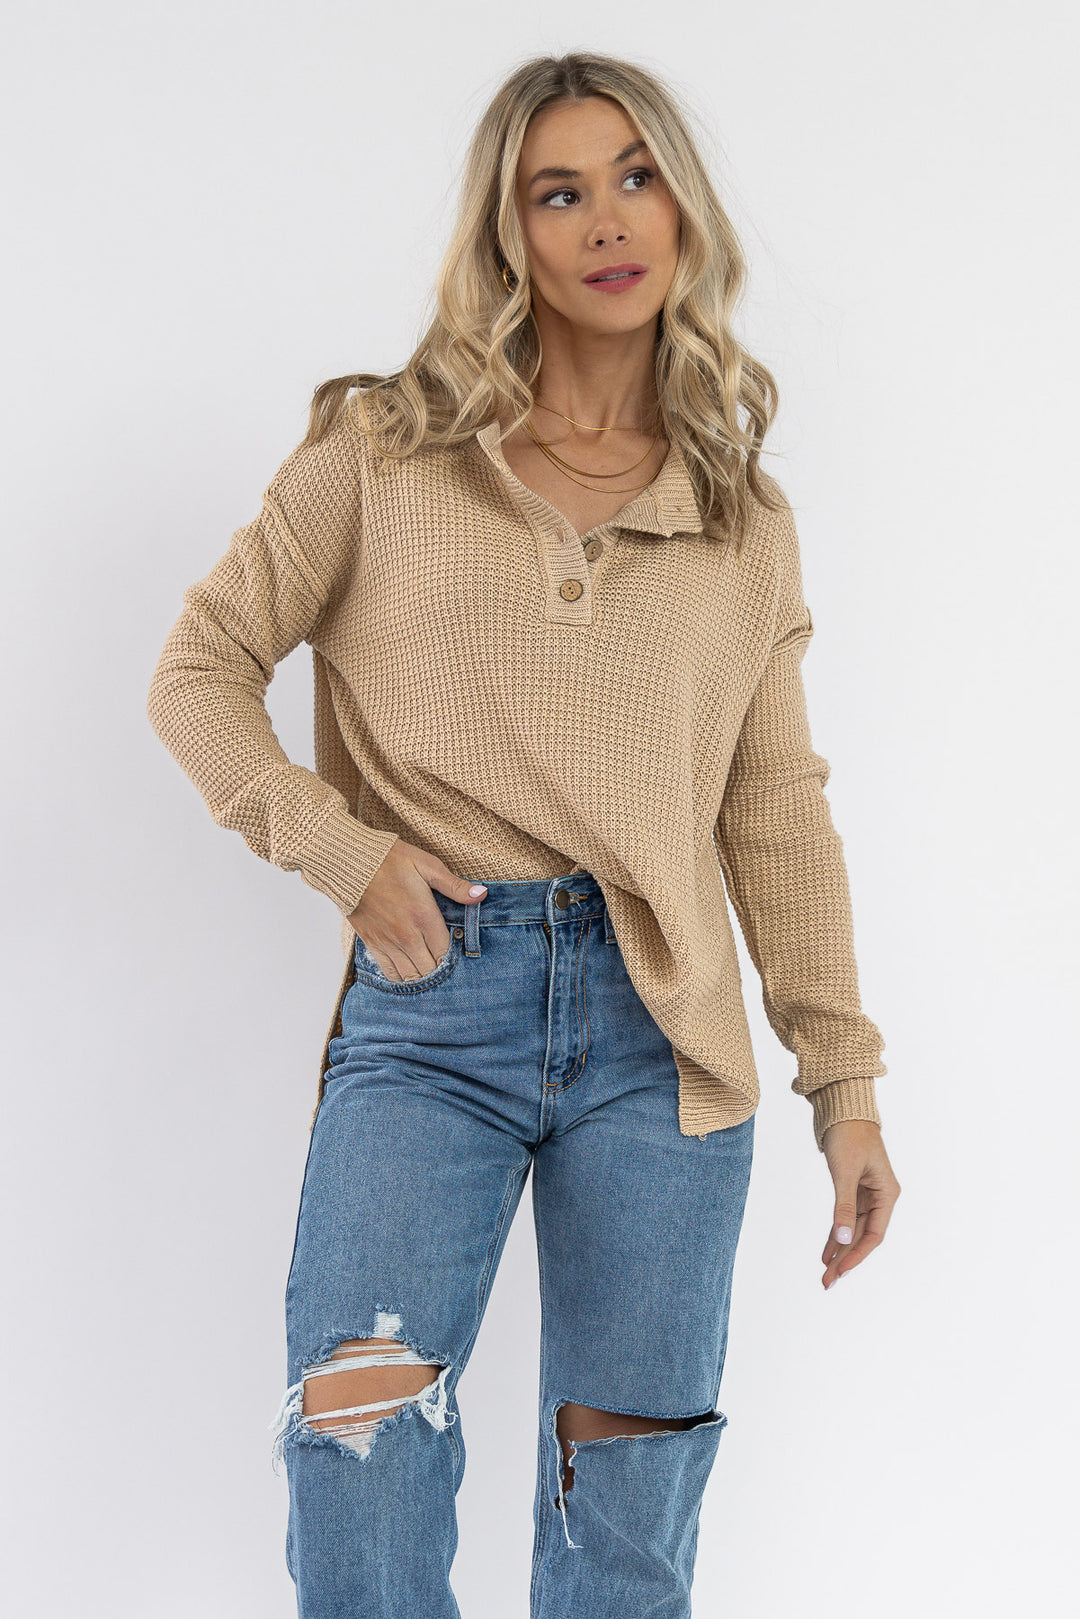 Sweater Weather Waffle Knit Top